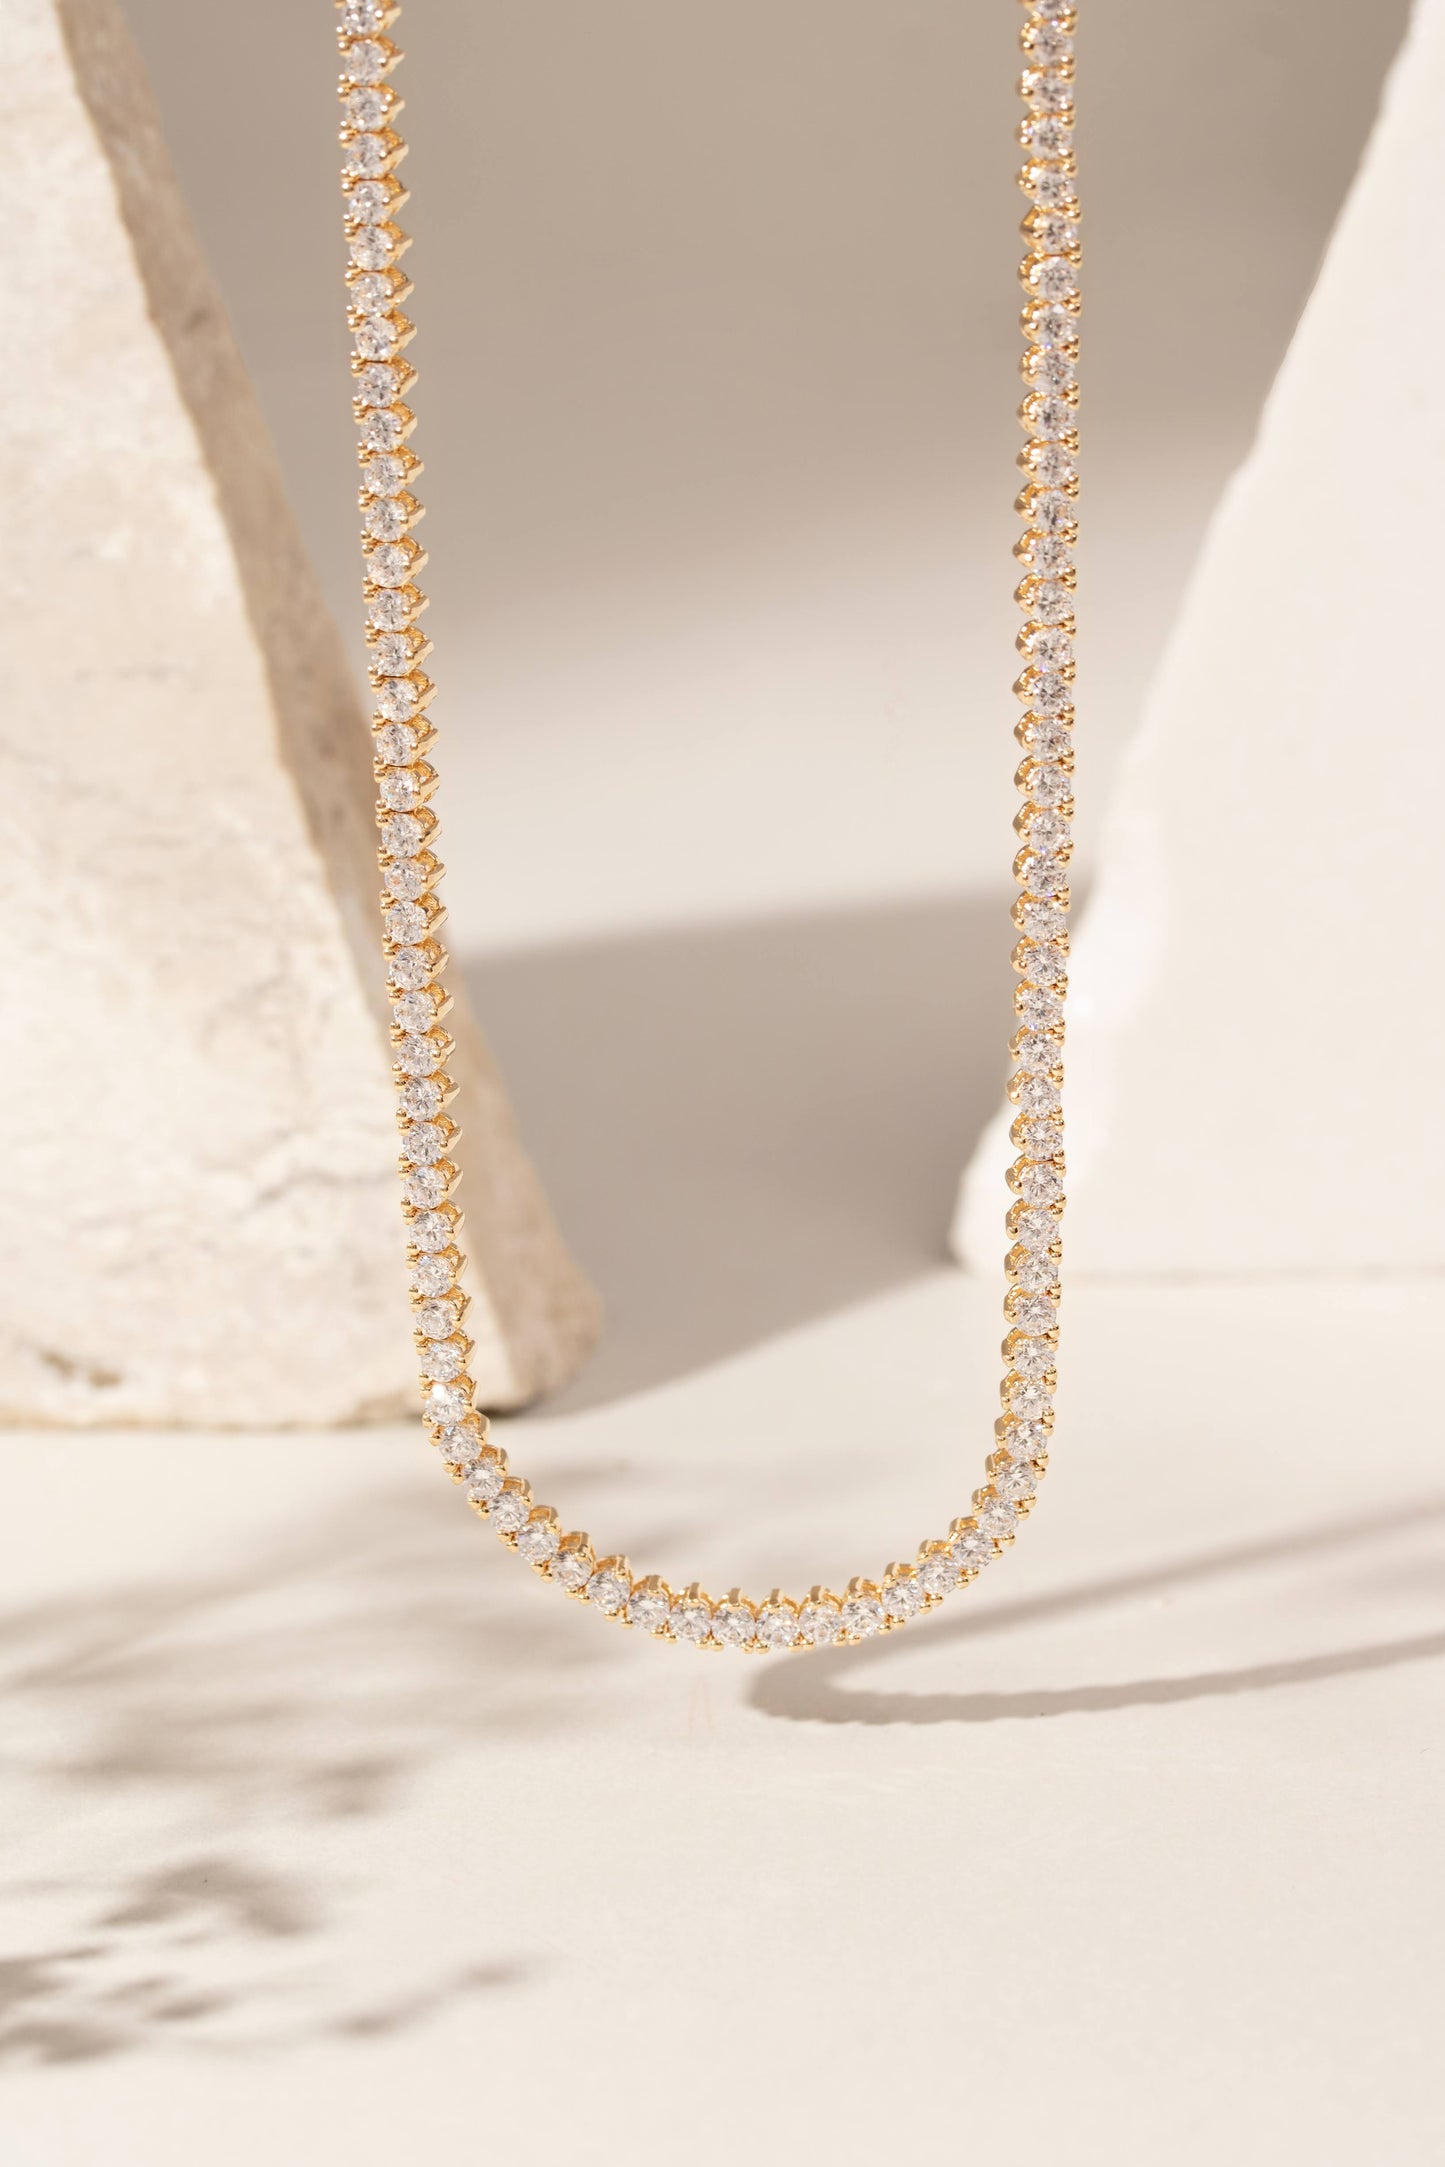 Tennis Necklace 3MM 3 points 18K Gold Filled (Riviera)